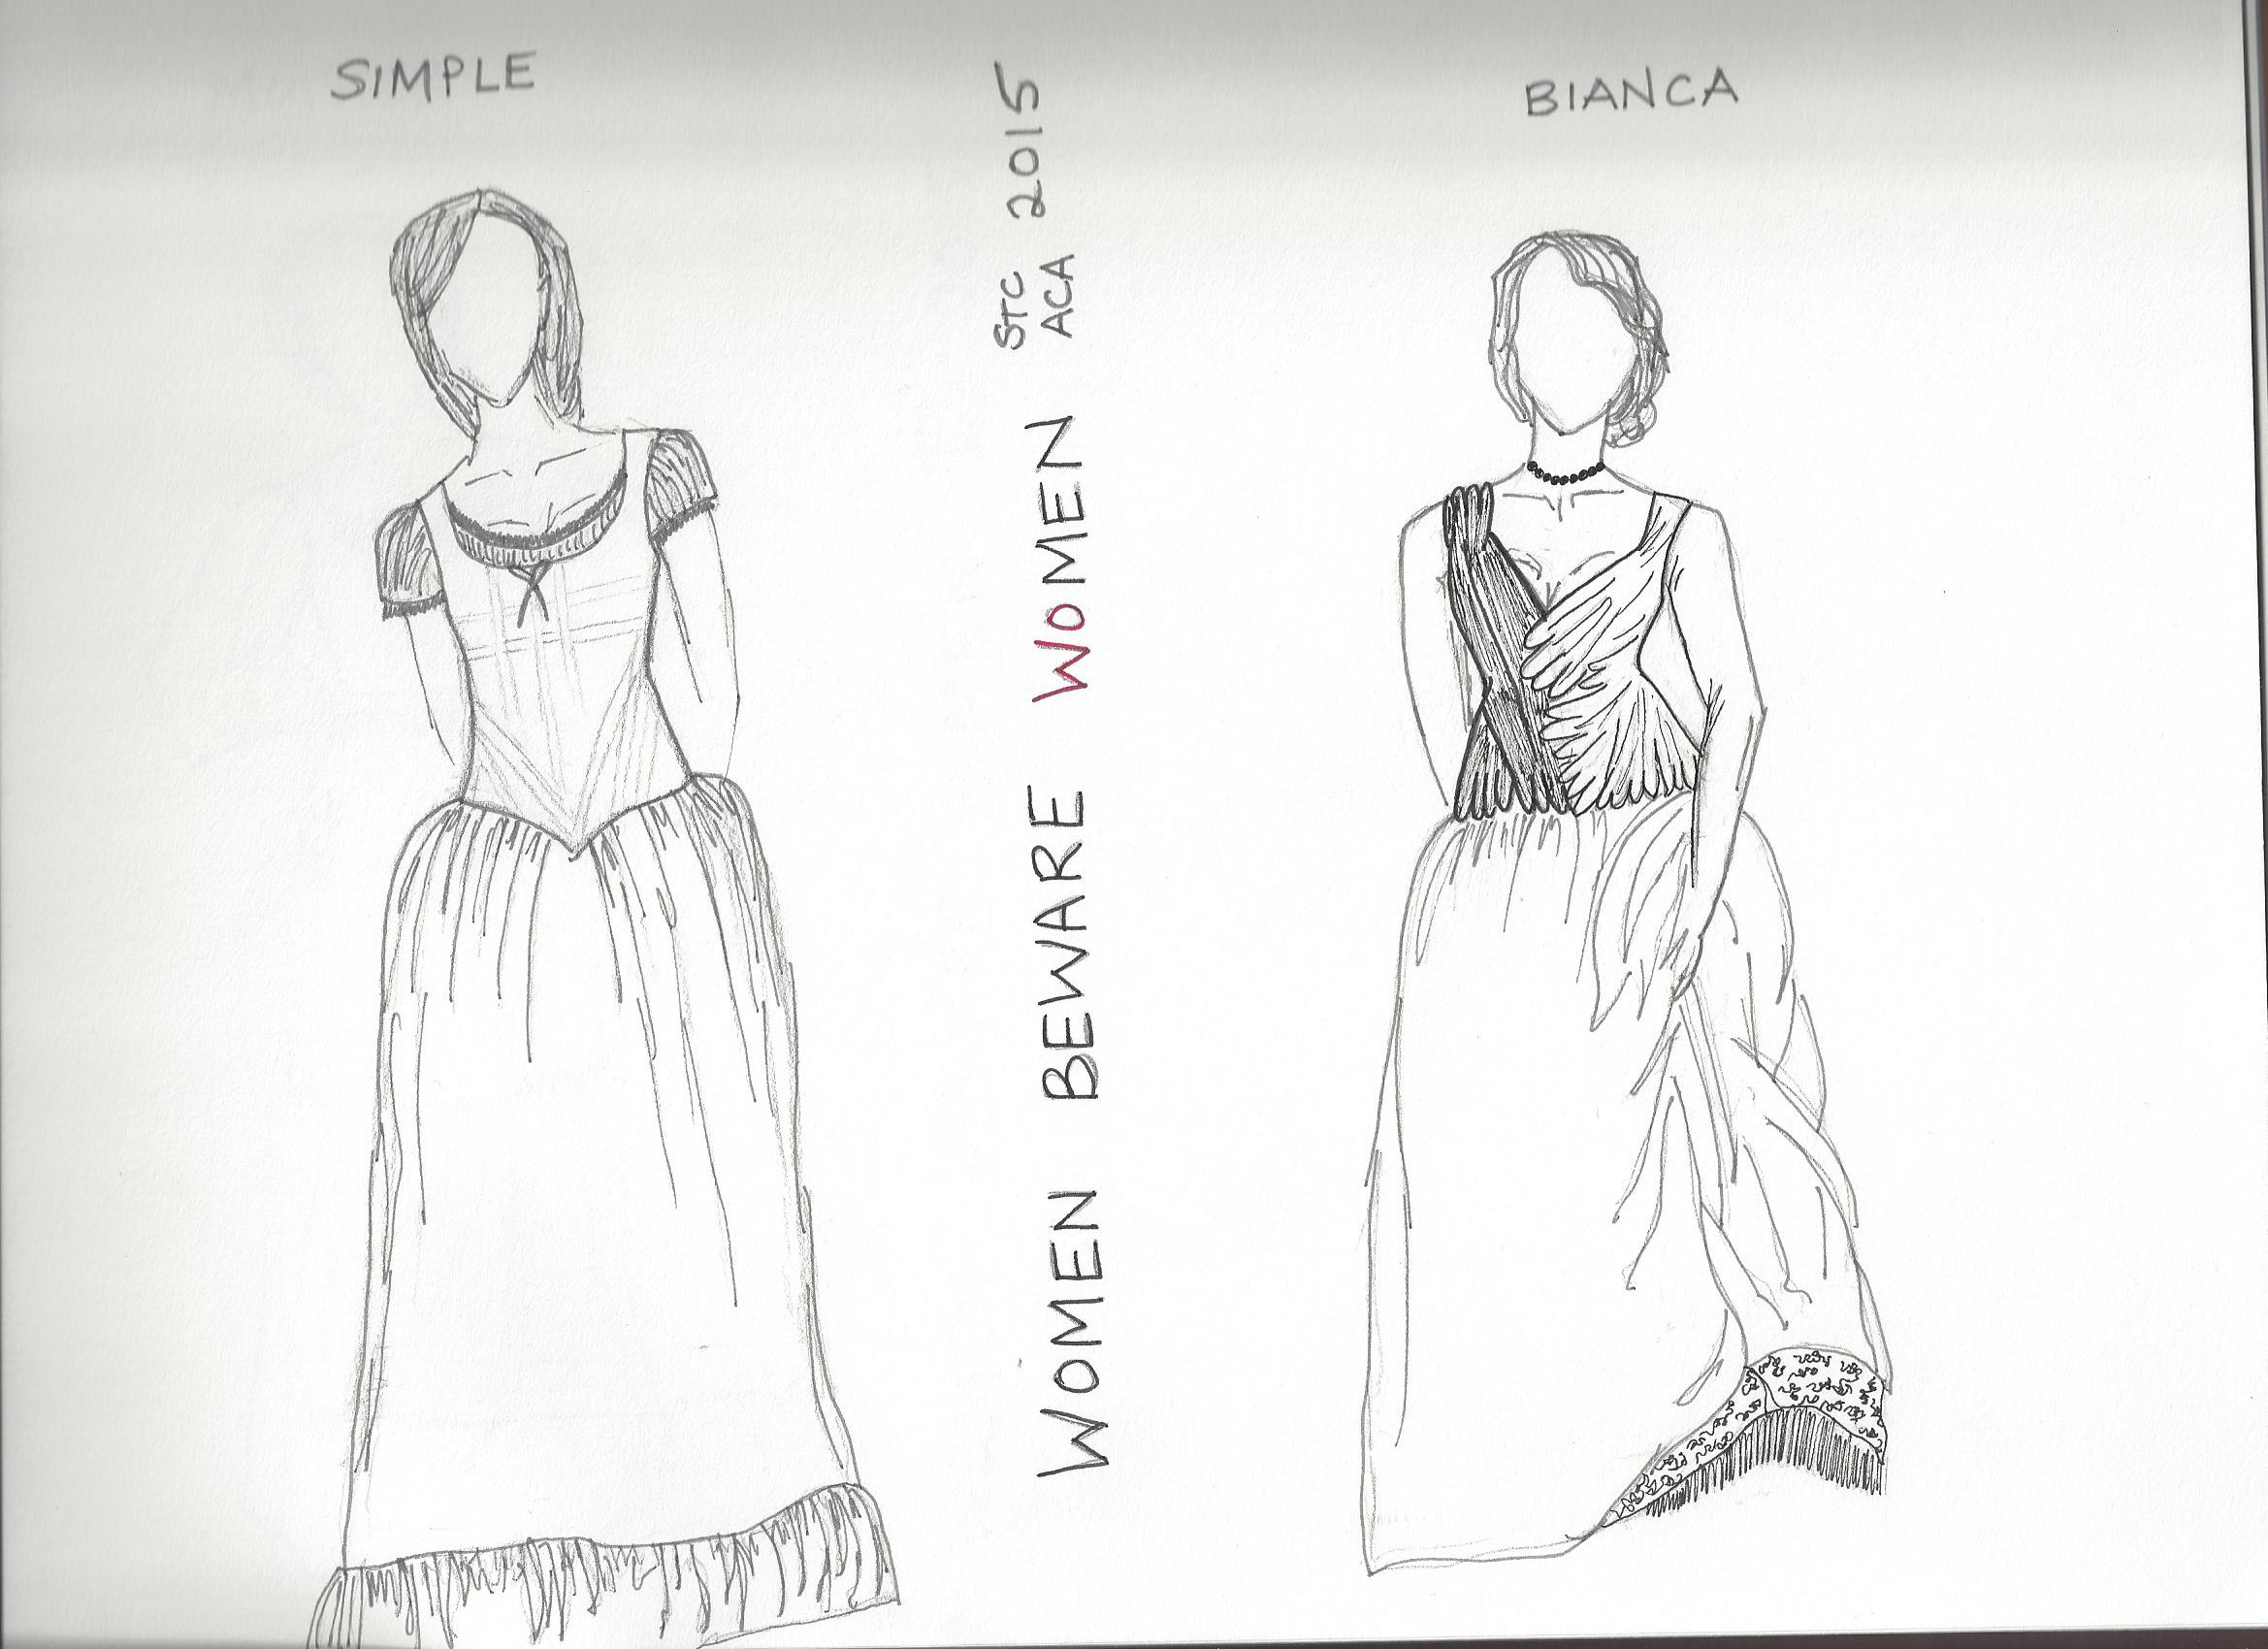  B&amp;W Sketches - Simple and Bianca's Final Look    Women Beware Women    Directed by Lisa Wolpe With Eleanor Holdridge The Shakespeare Theatre's Academy for Classical Acting with GWU June 2015        